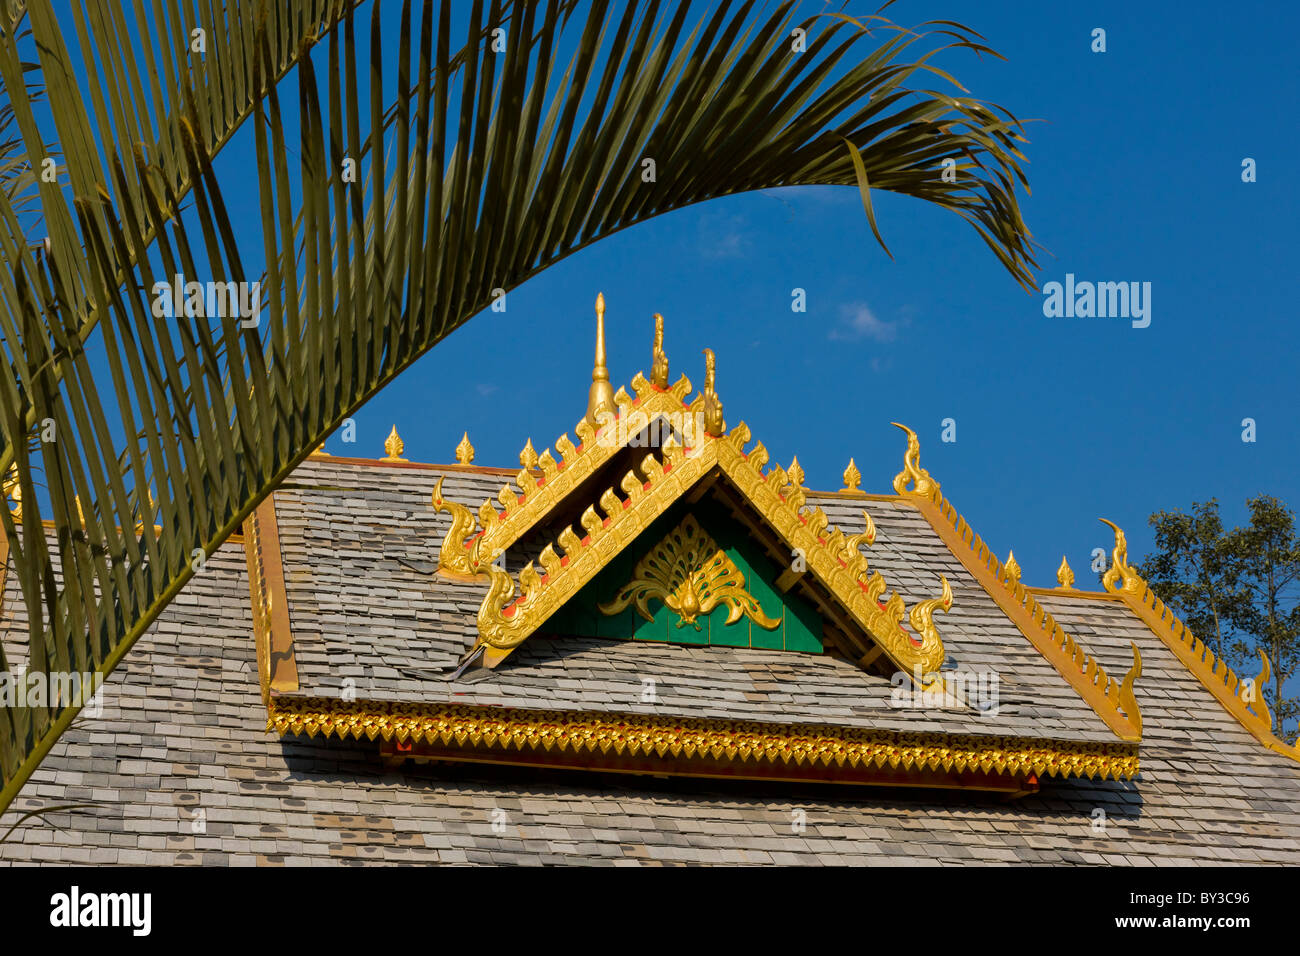 Roof detail, Tea Research Institute, Yunnan Province, Xishuangbanna, China. JMH4232 Stock Photo